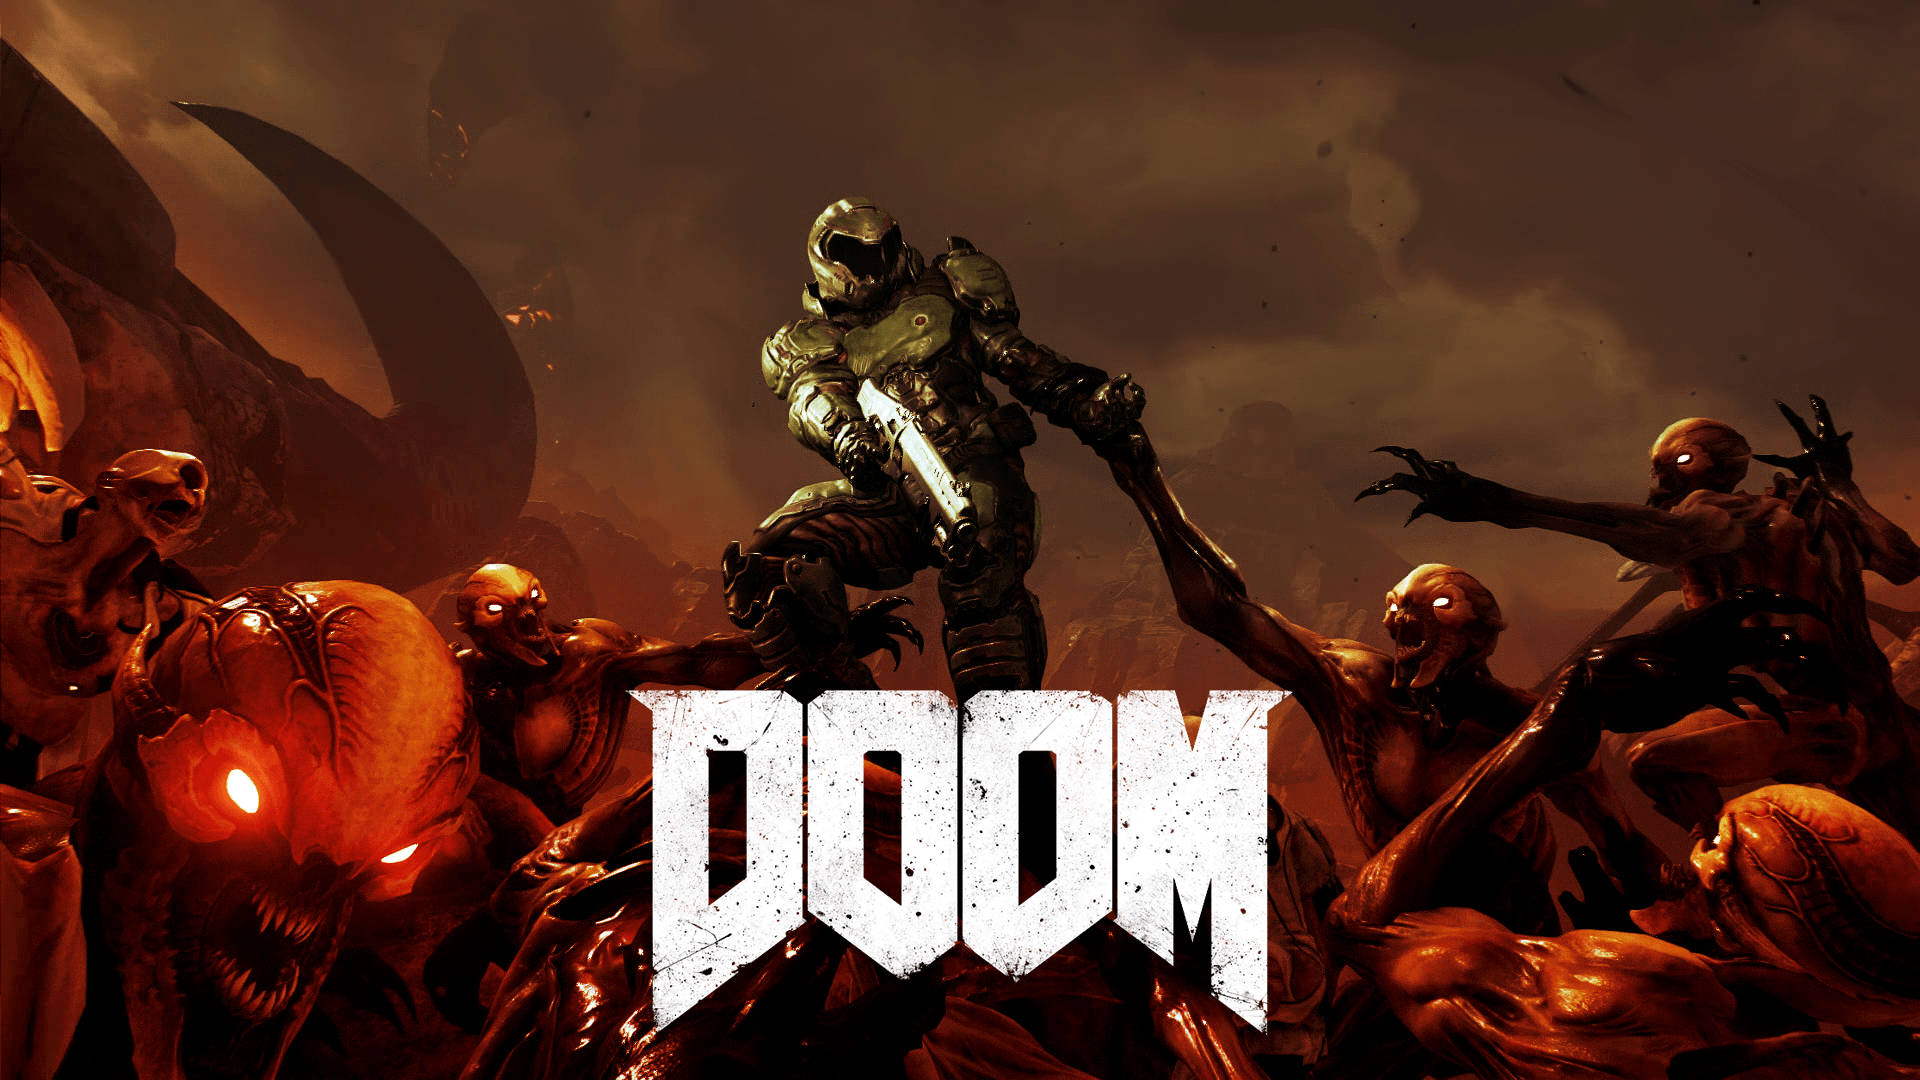 A scene from the groundbreaking action-adventure Doom videogame. Wallpaper